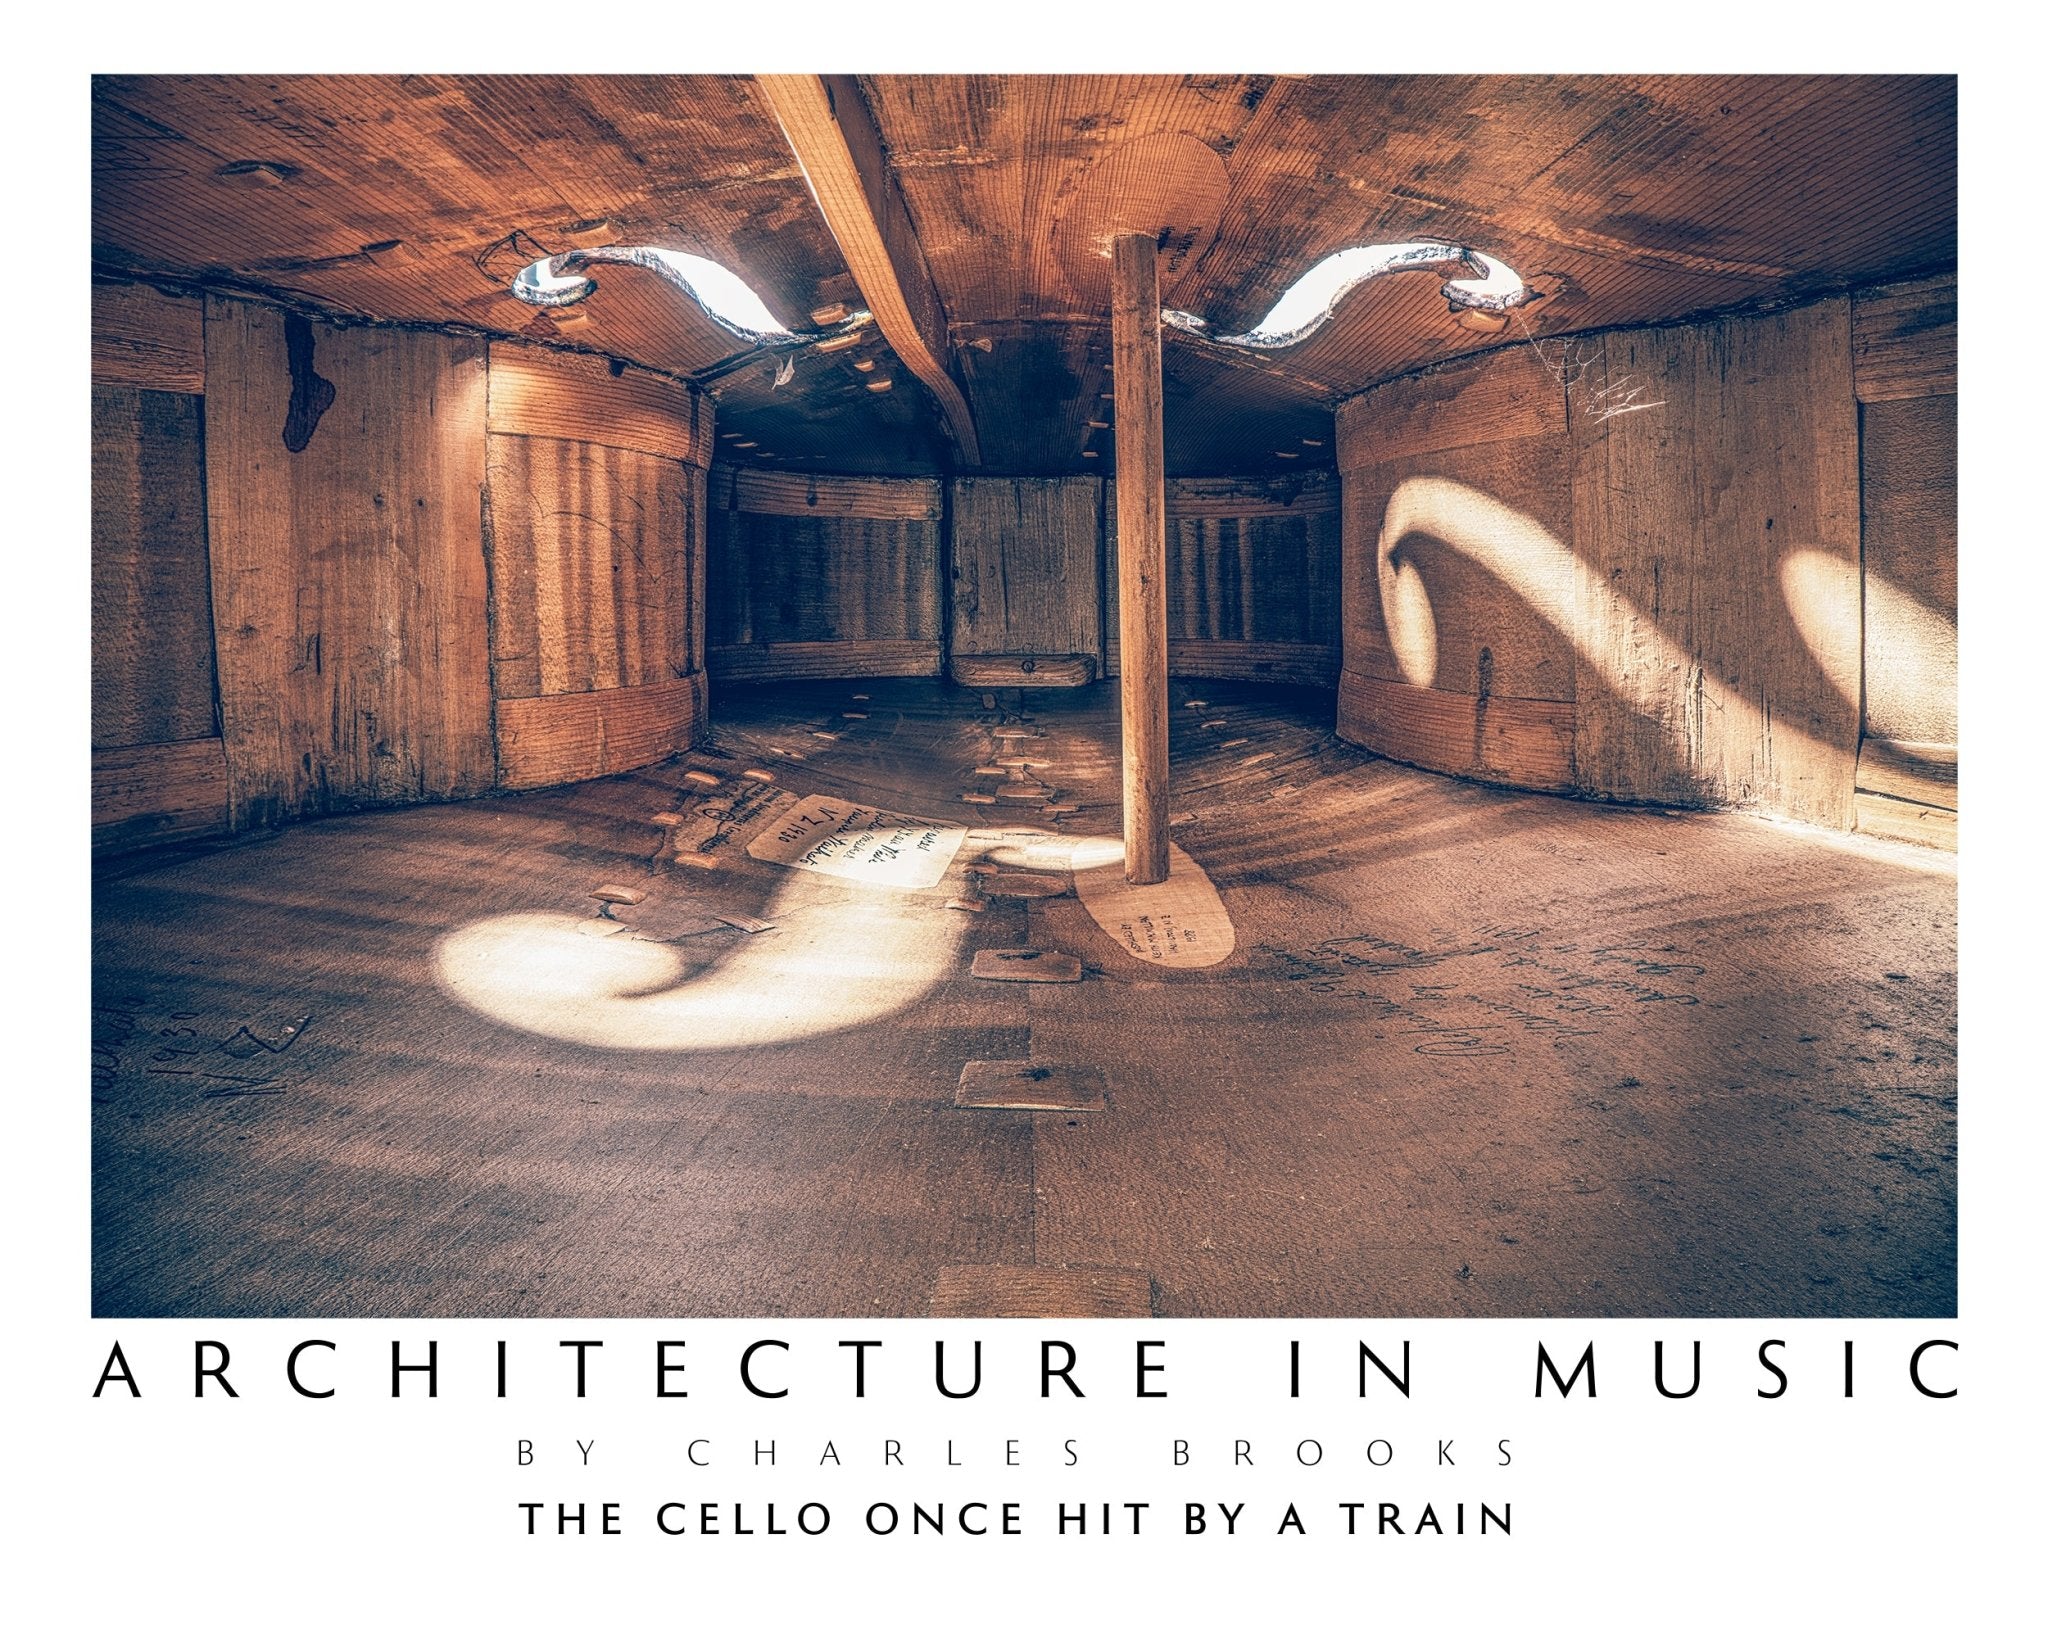 Photo of The Cello Once Hit by a Train. High Quality Poster. - Giclée Poster Print - Architecture In Music